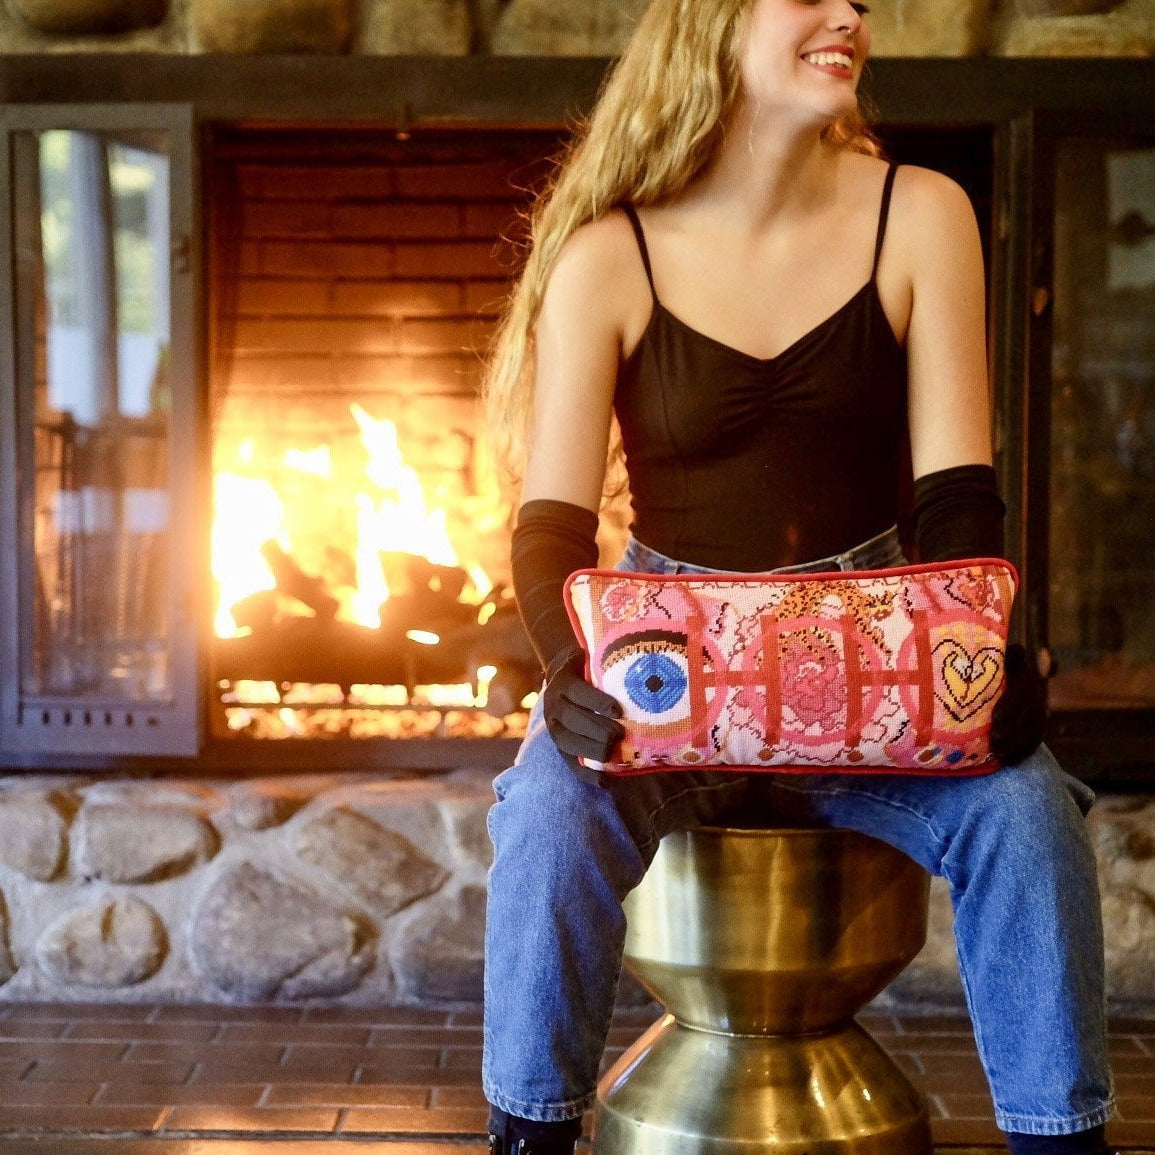 velvet pillow with pink and red colorful pattern, blue eye, cheetah, heart snakes, roses and lettering OOH in center with a LA LA LA border model at fireplace